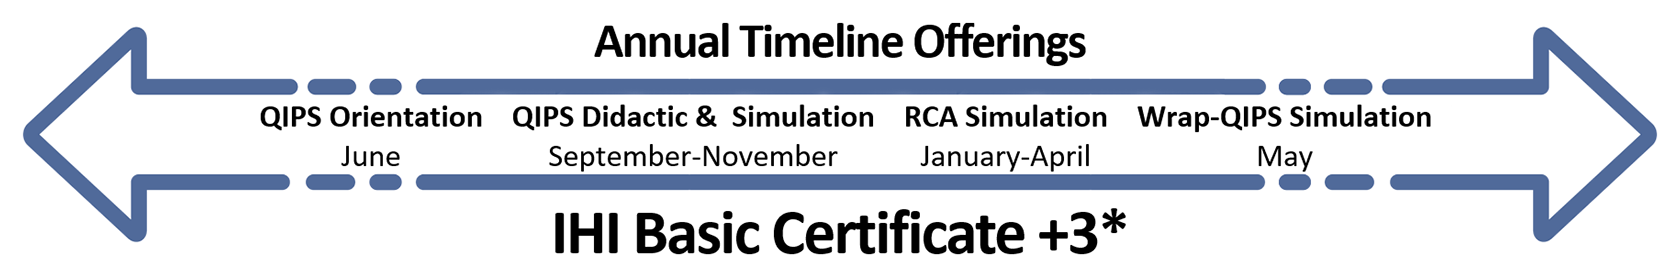 Annual Timeline Offerings for IHI Basic Certificate +3: QIPS Orientation (June), QIPS Didactic and Simulation (September to November), RCA Simulation (January to April), Wrap-QIPS Simulation (May)